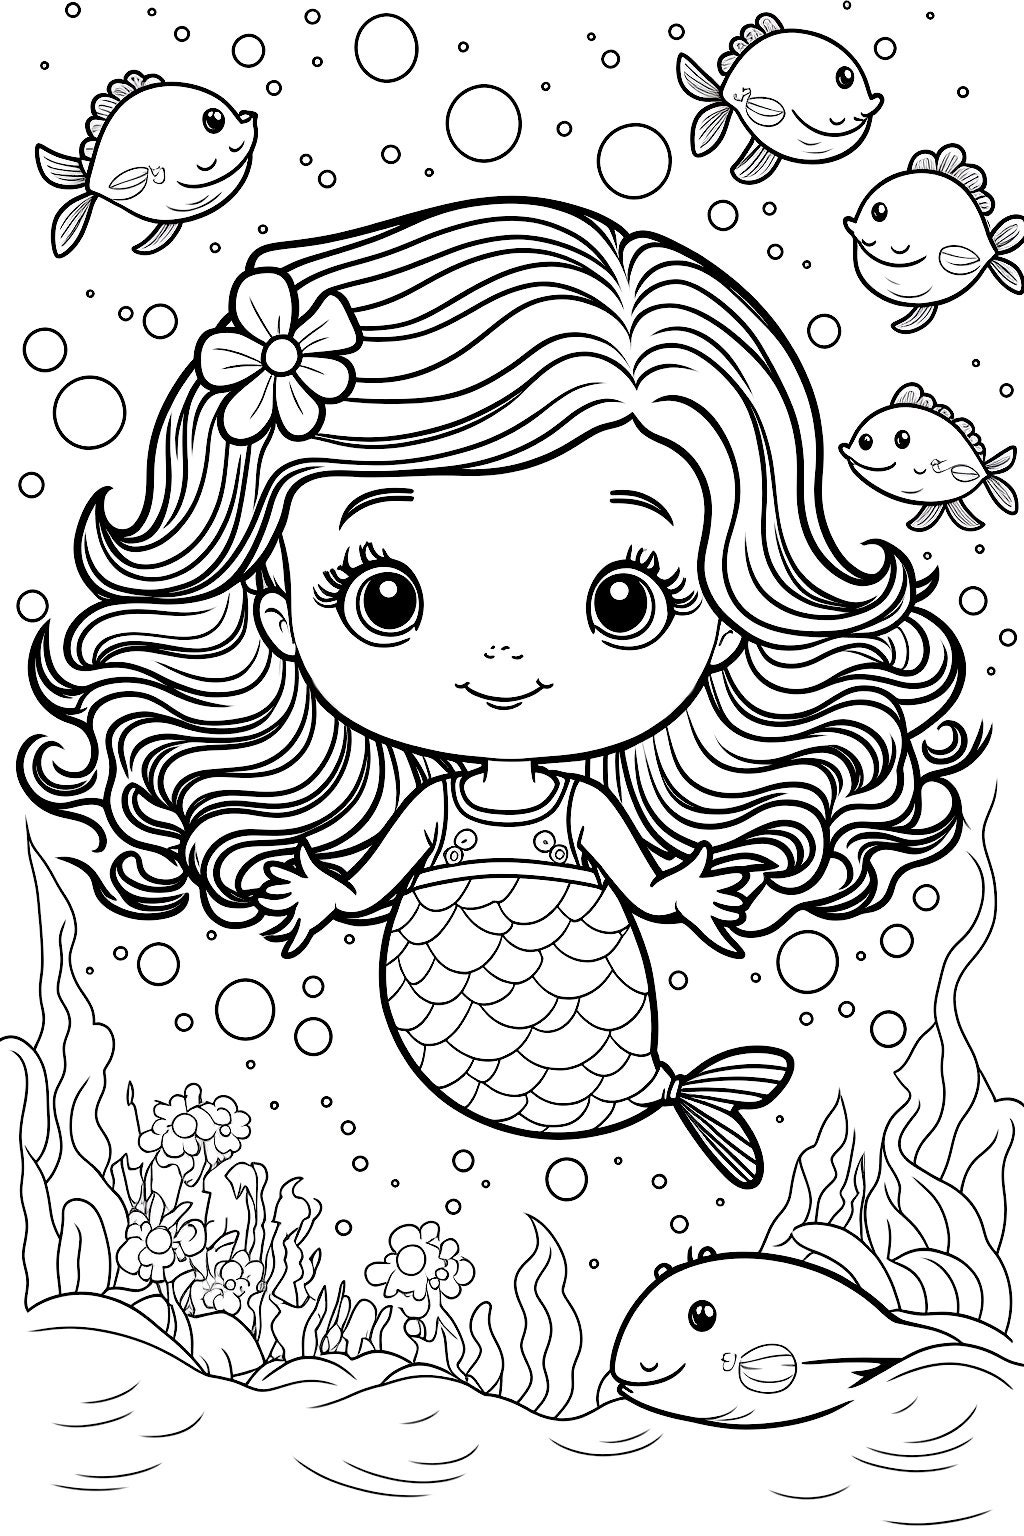 Mermaid Coloring Book For Girls Ages 8-12 : Cute Nautical Themed Color, Dot  To Dot, And Word Search Puzzles Provide Hours Of Fun For Creative Young  Children - Color My World - 9781695398580 